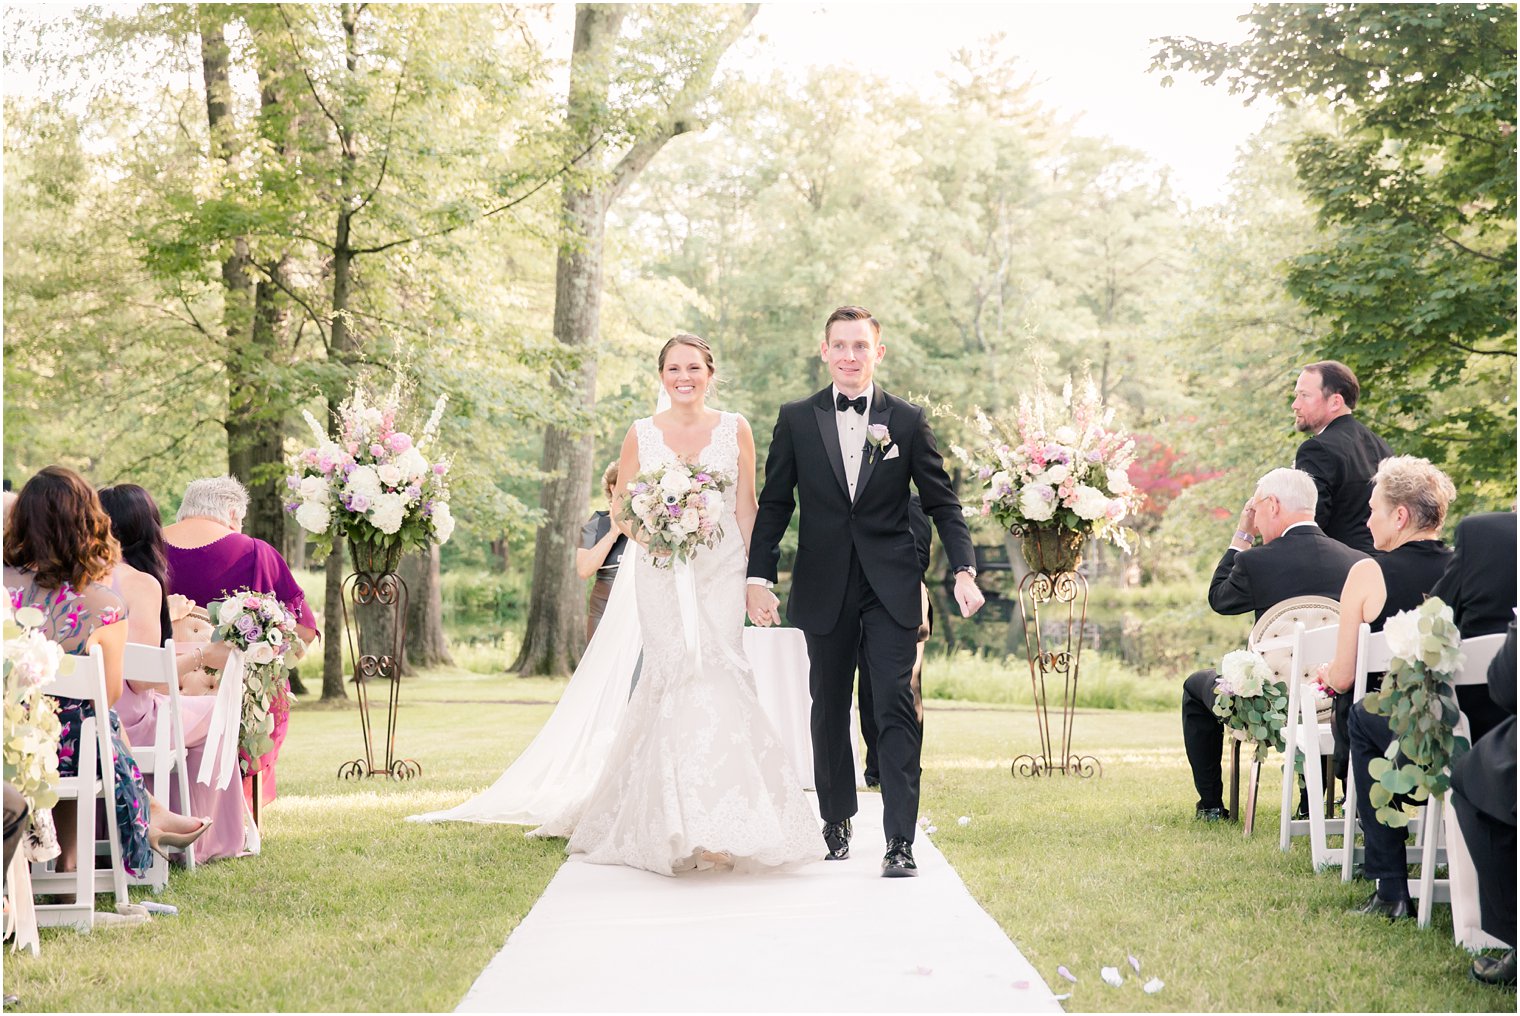 wedding recessional photo at Pleasantdale Chateau